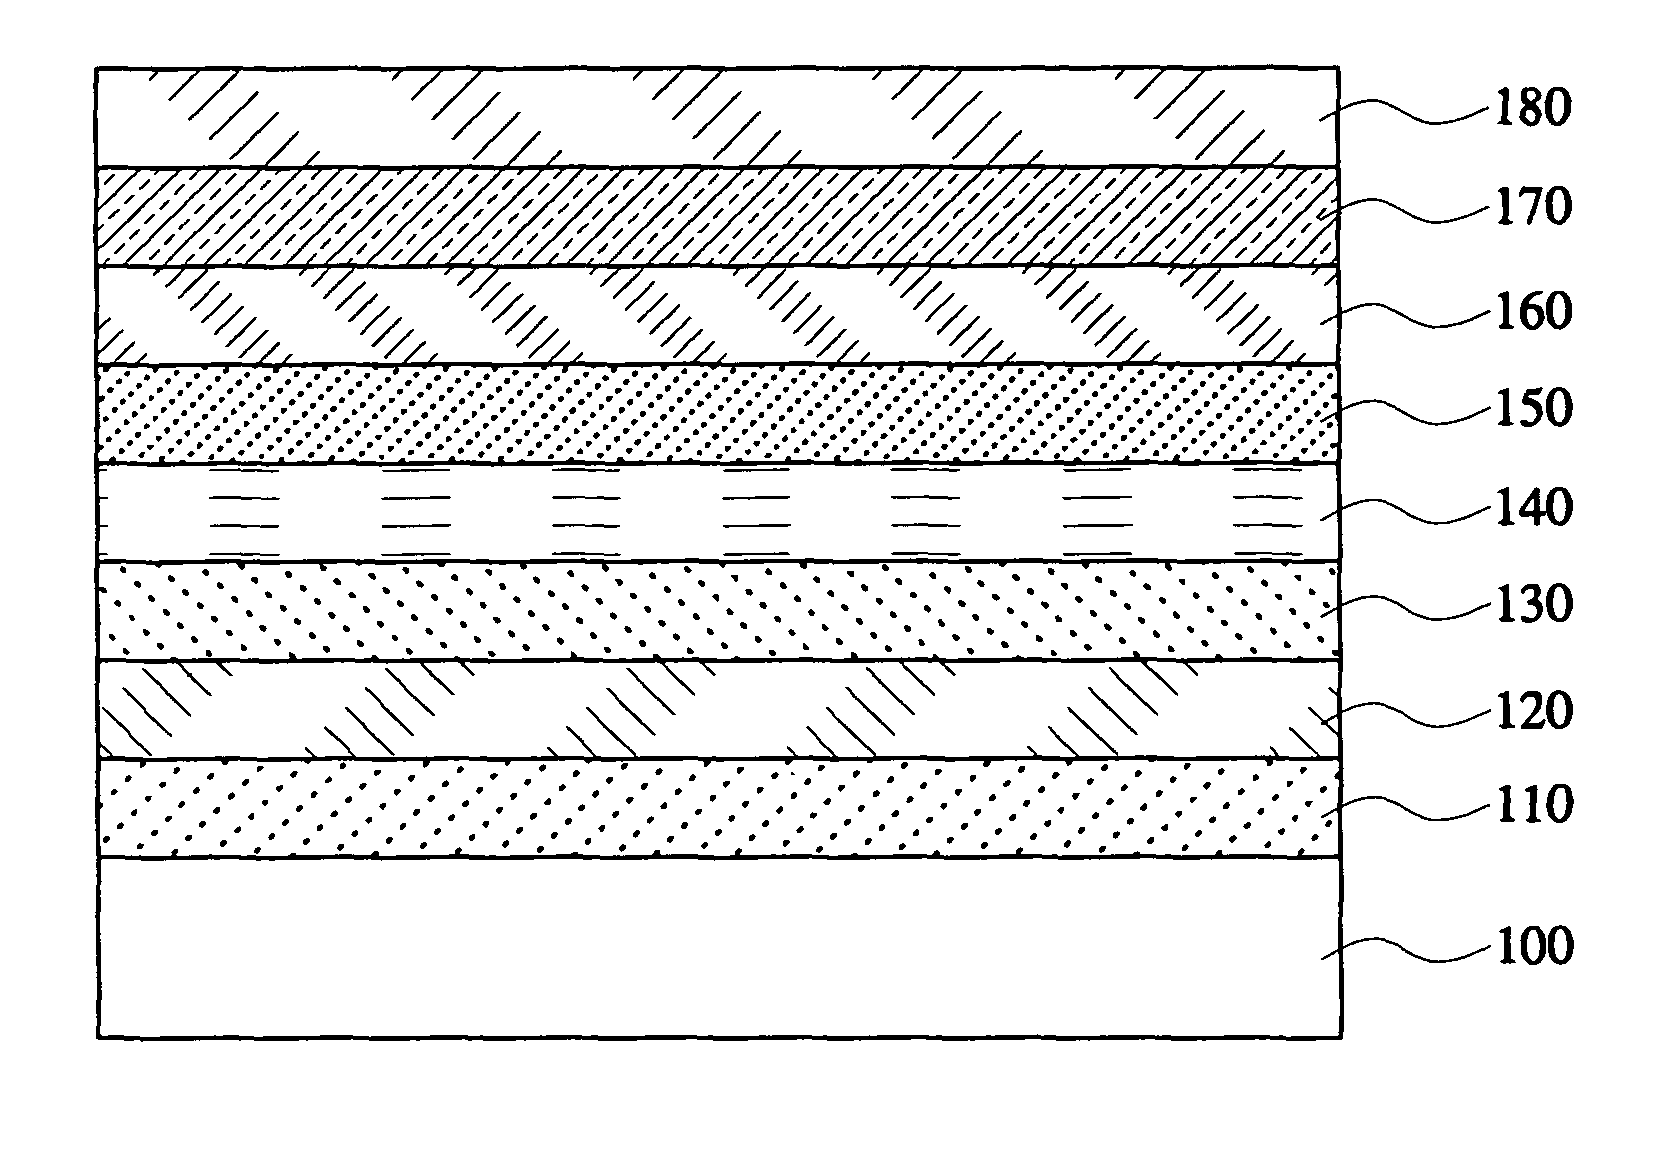 Organic light-emitting device employing doped hole transporting layer and/or hole injecting layer